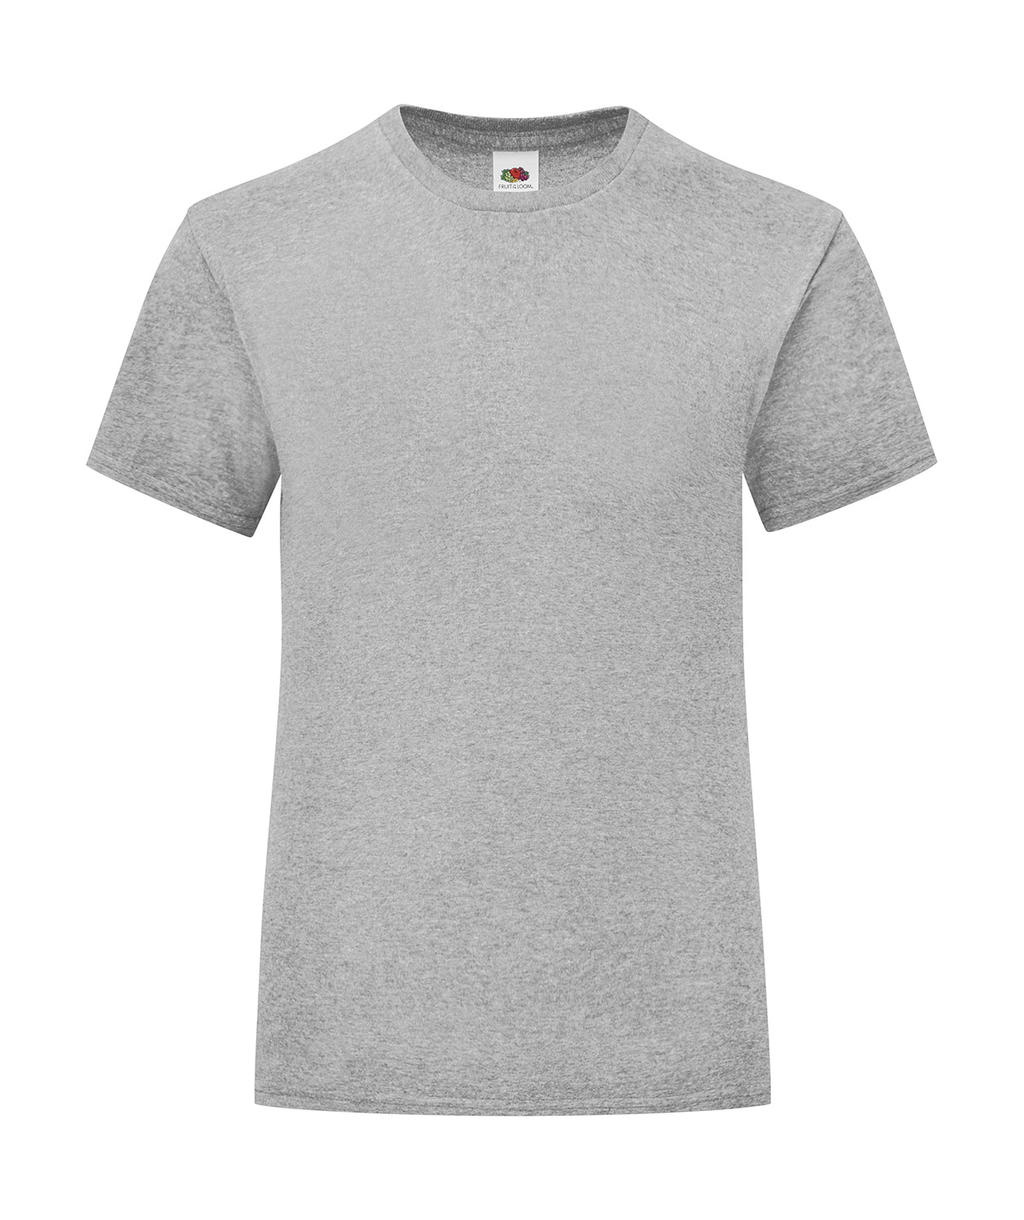  Girls Iconic 150 T in Farbe Heather Grey